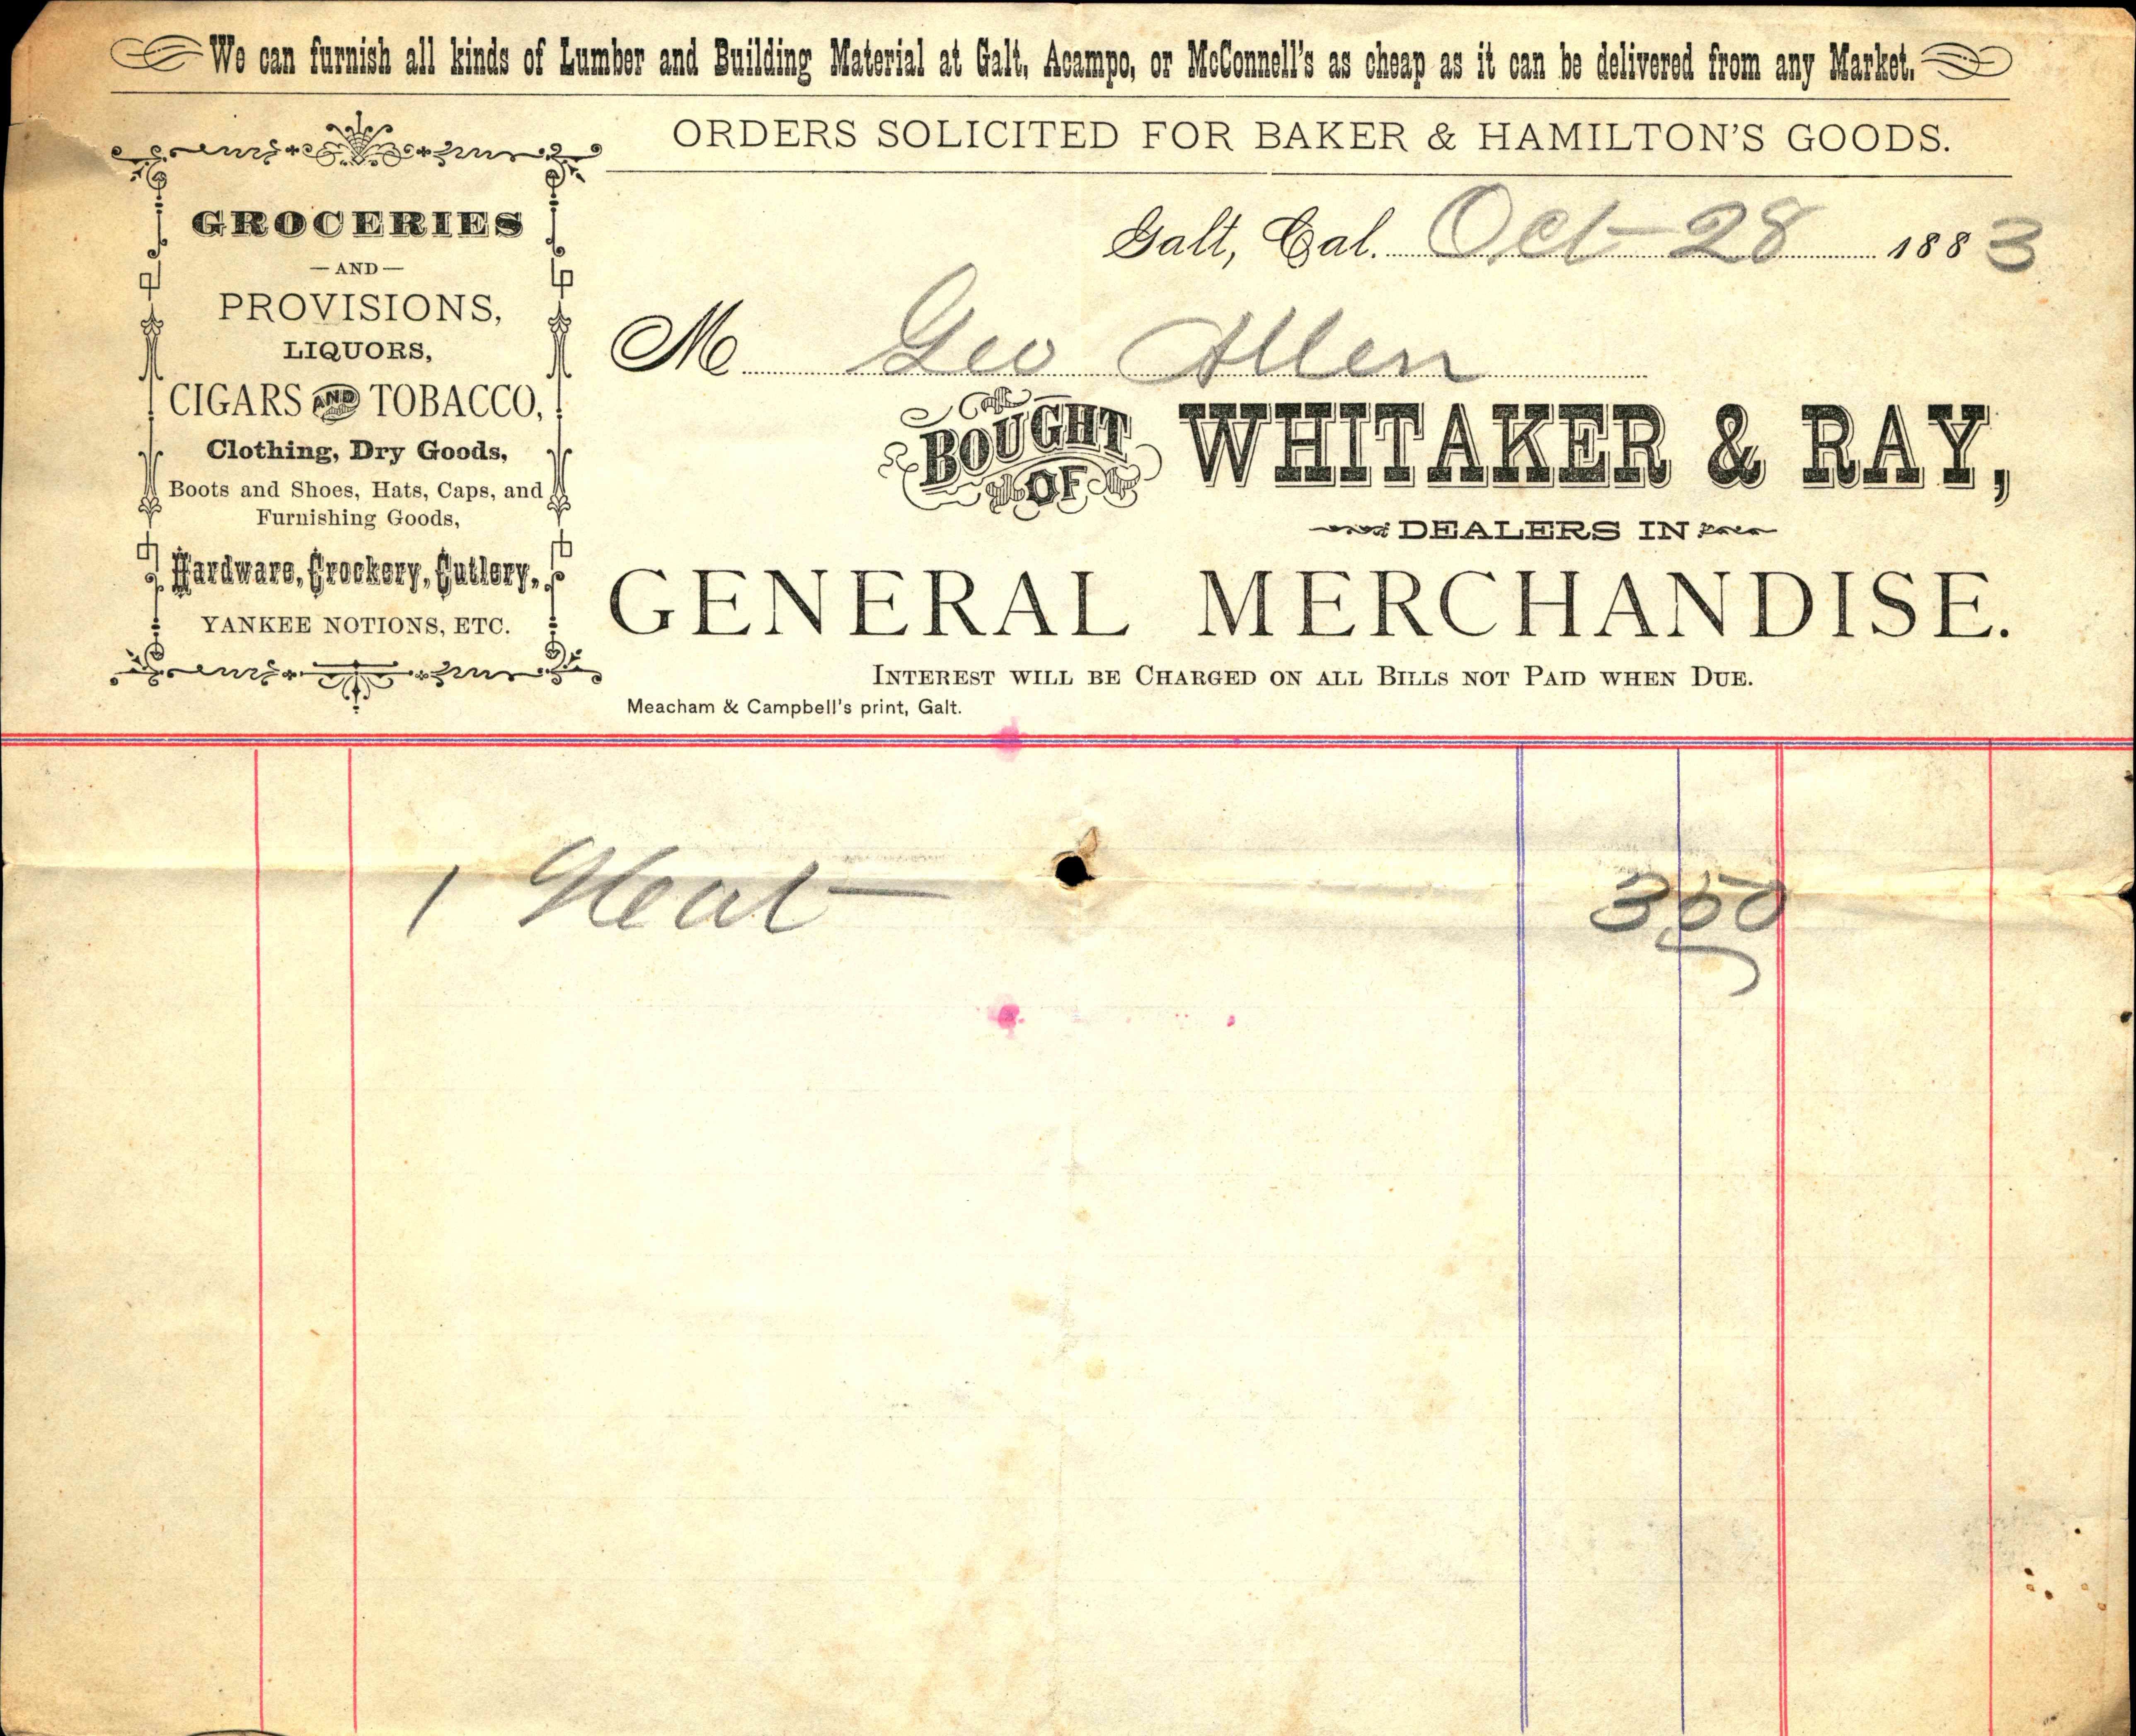 Receipt for clothing, dry goods, groceries